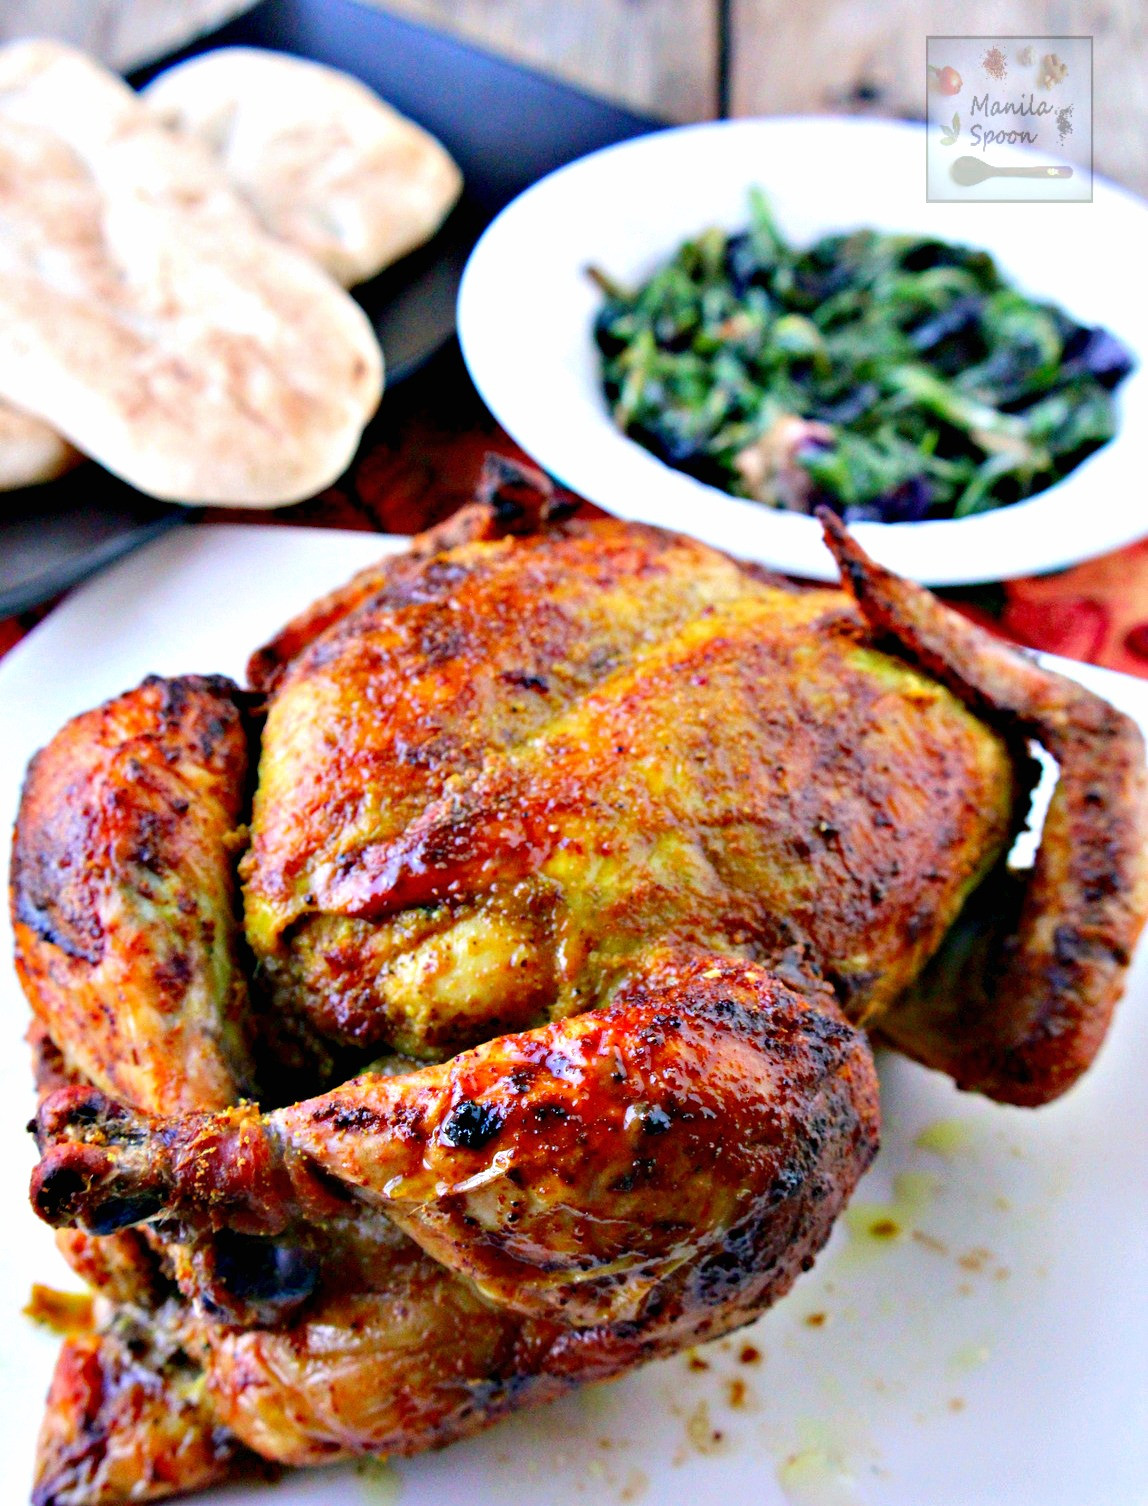 Whole Chicken Recipes
 13 Outrageously Delicious Whole Chicken Recipes